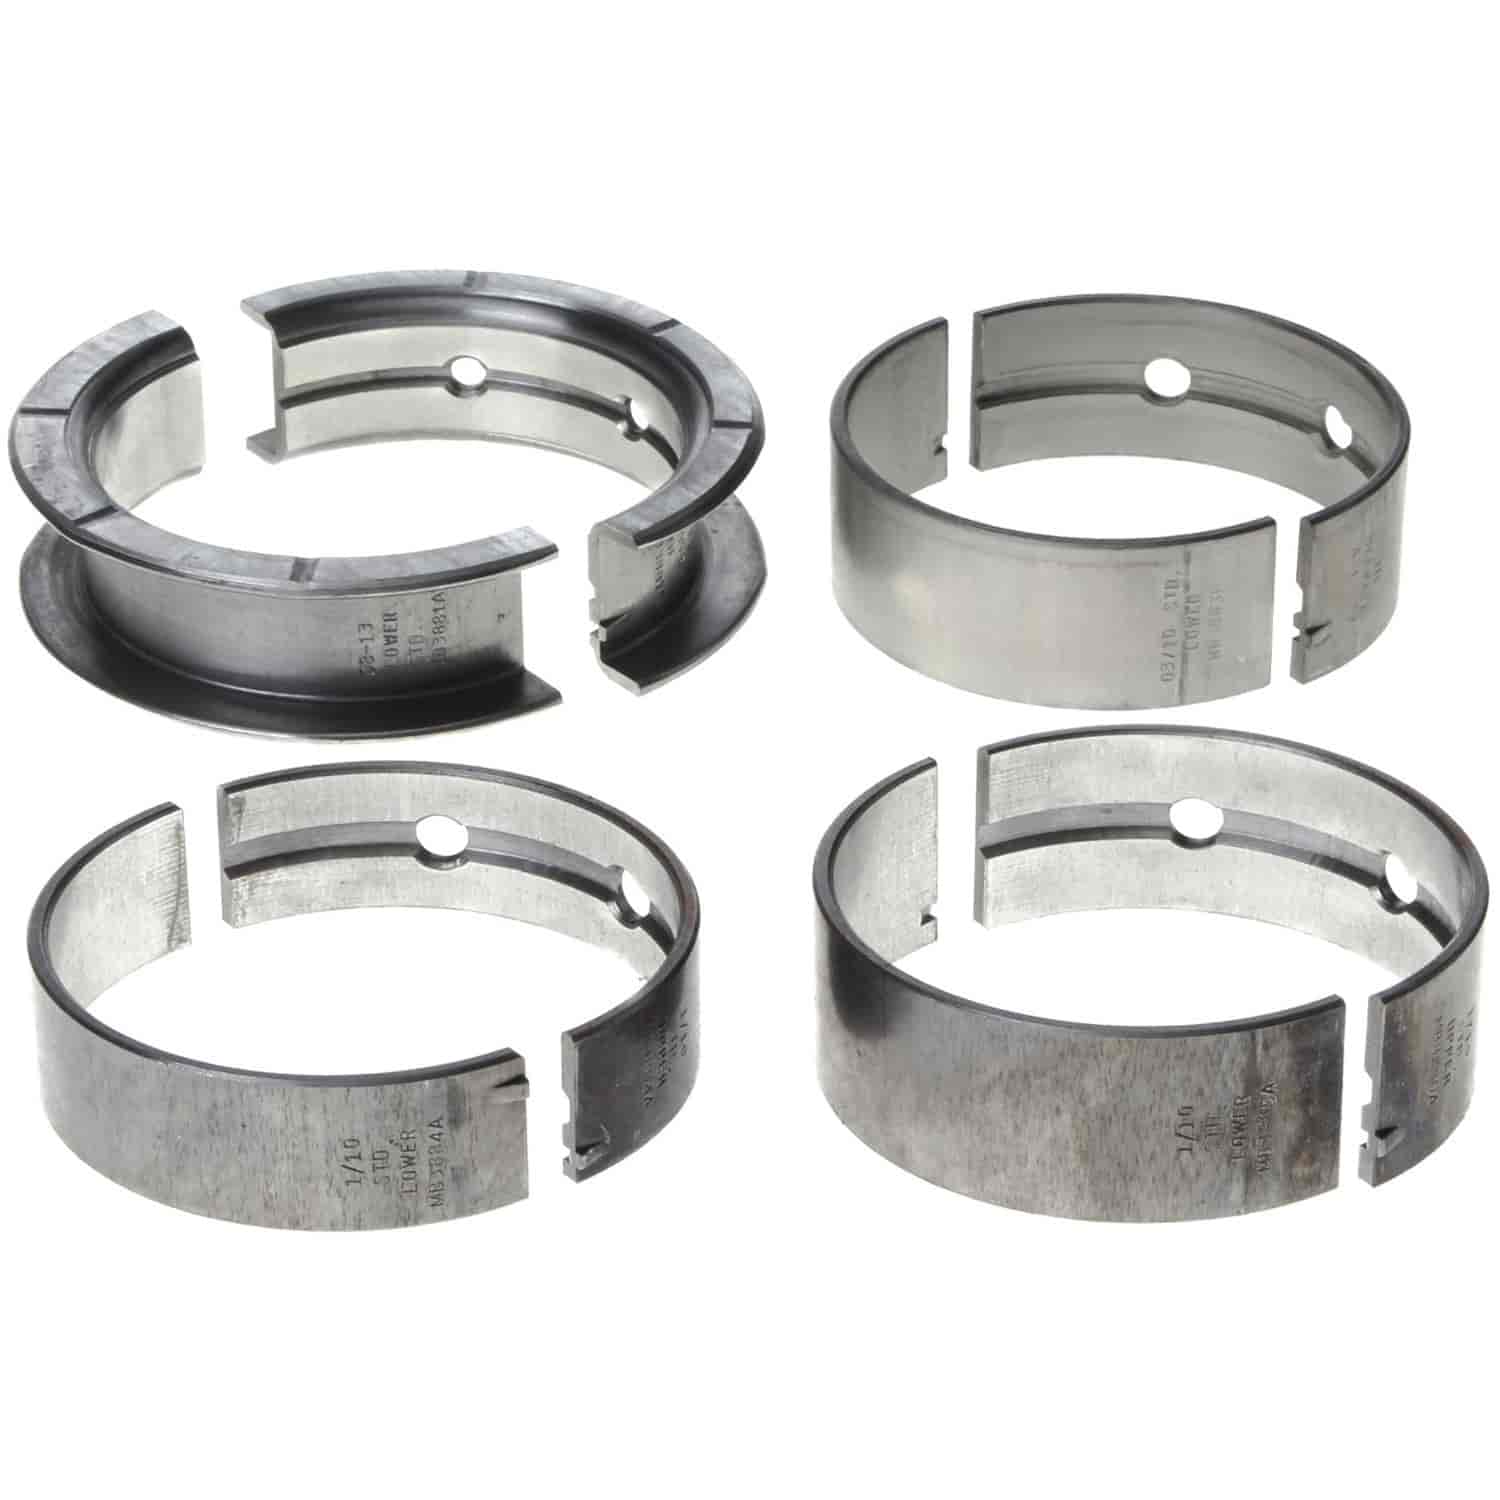 Main Bearing Set Chevy 2006-2011 V6 3.5/3.9L with -.25mm Undersize